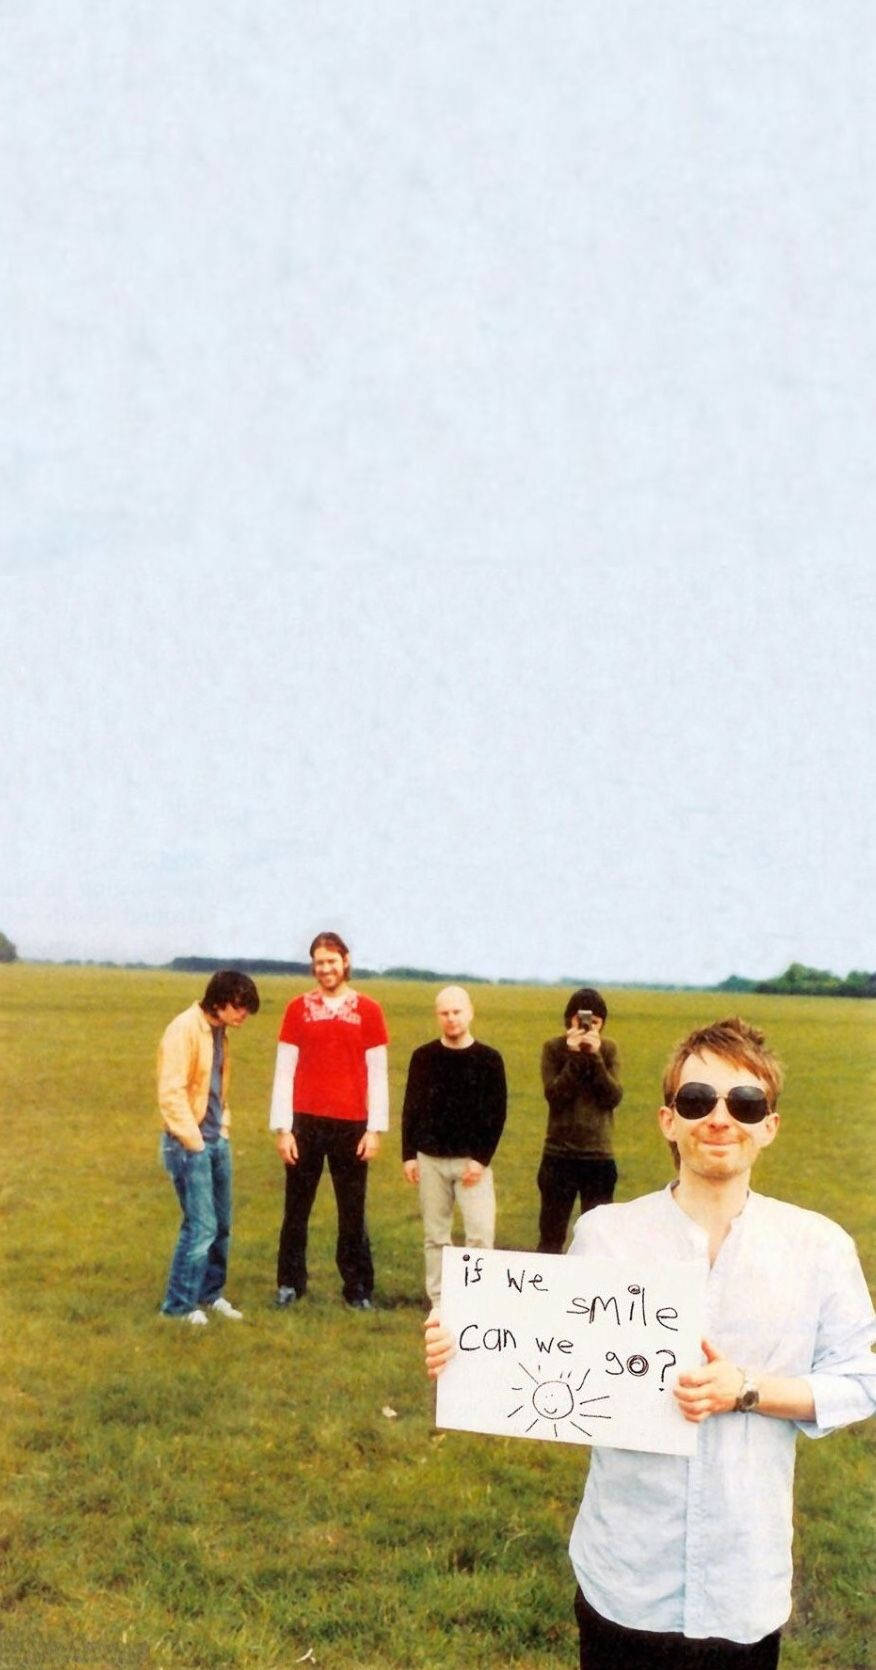 Radiohead If We Smile Can We Go Wallpaper